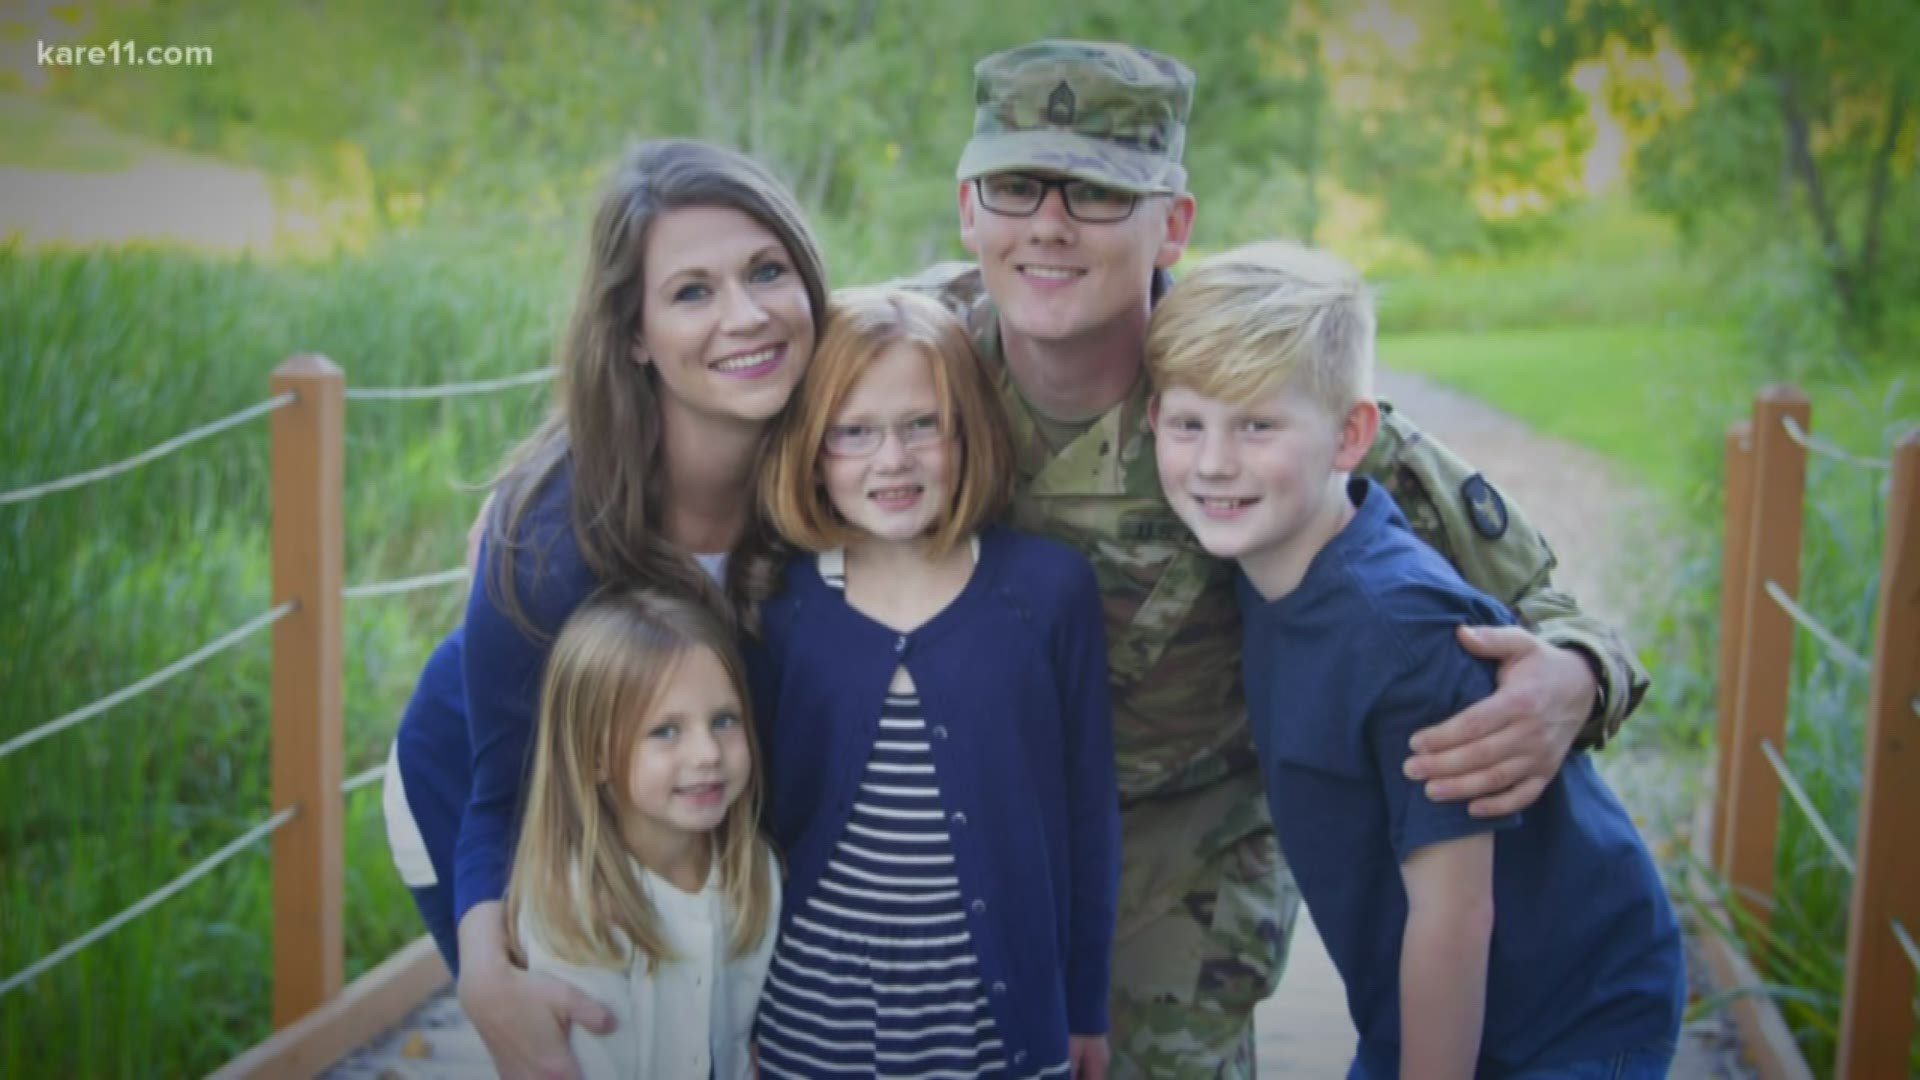 On a day when people pause to remember military members deployed, Amanda says actions can help families experiencing loss or separation.